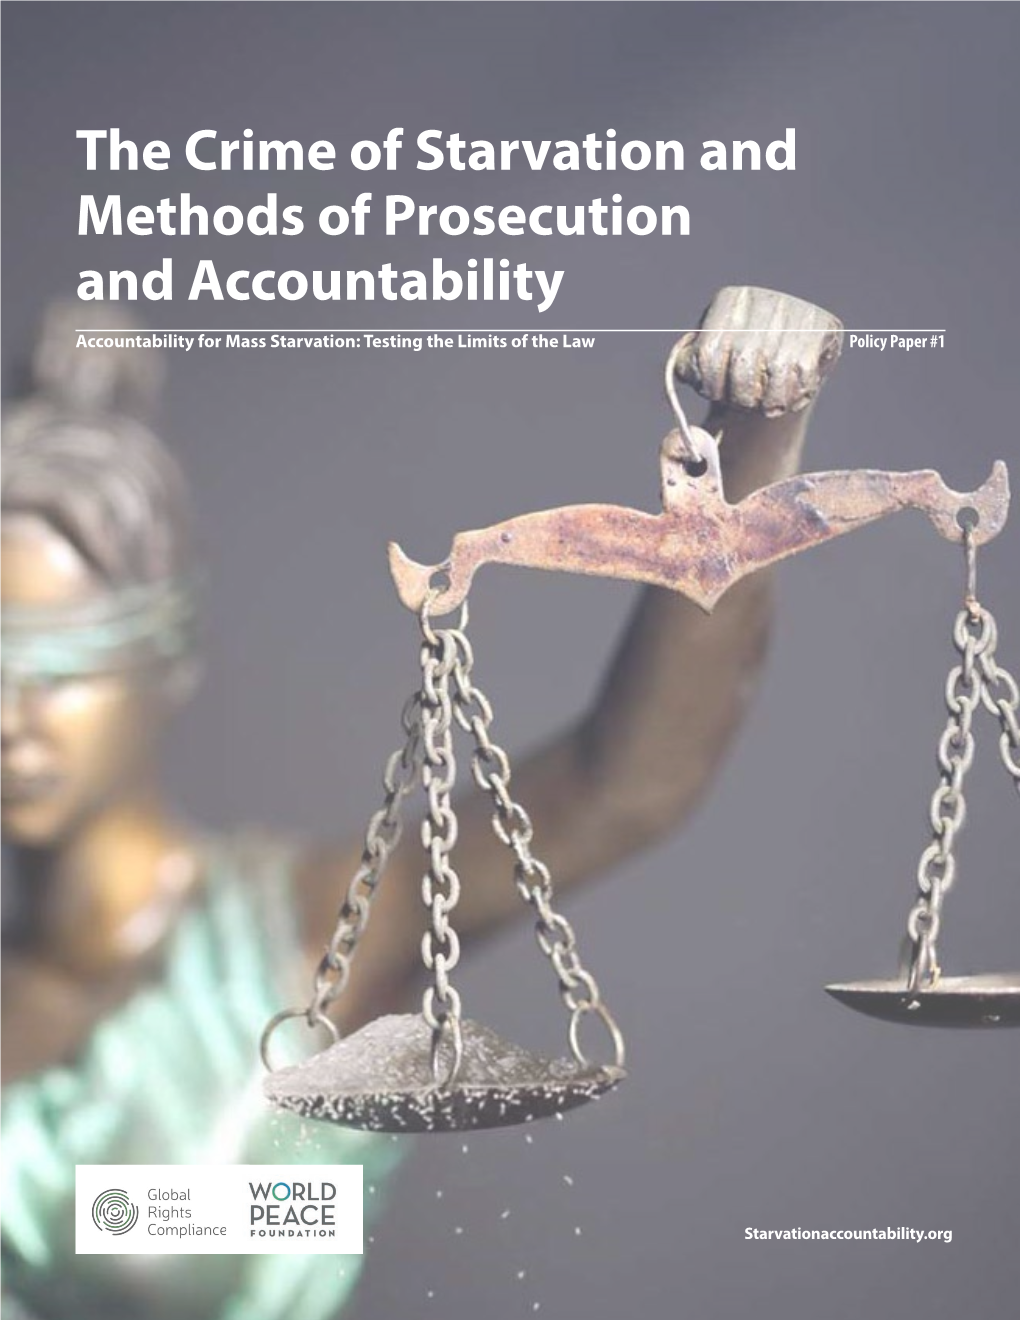 The Crime of Starvation and Methods of Prosecution and Accountability